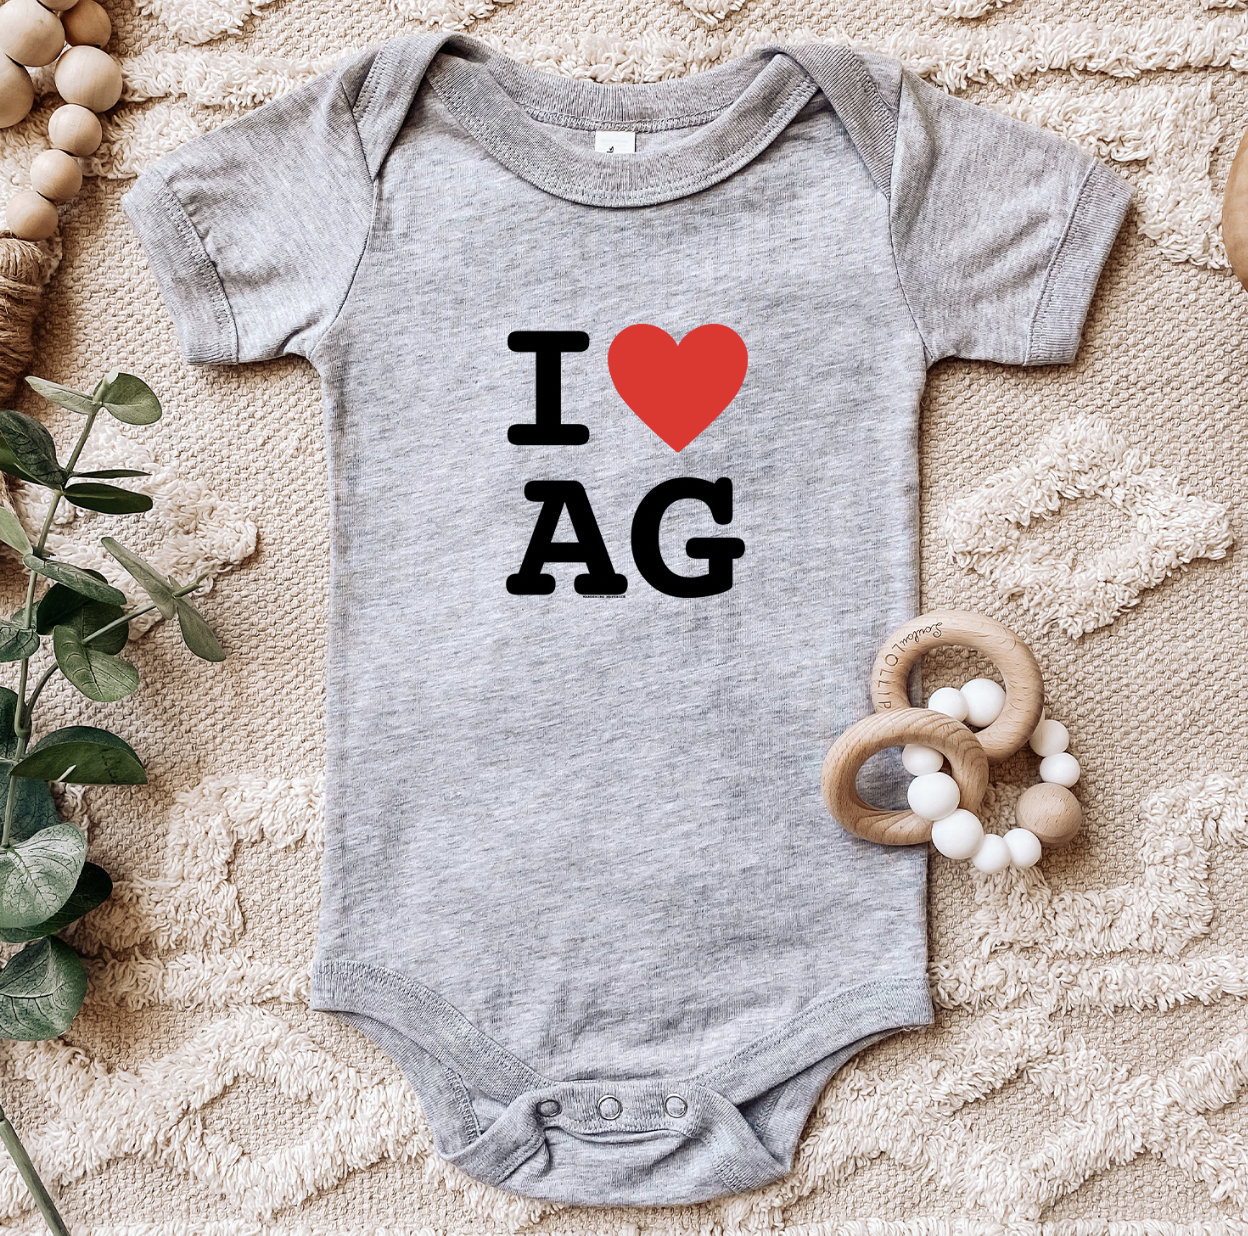 I Heart AG One Piece/T-Shirt (Newborn - Youth XL) - Multiple Colors!